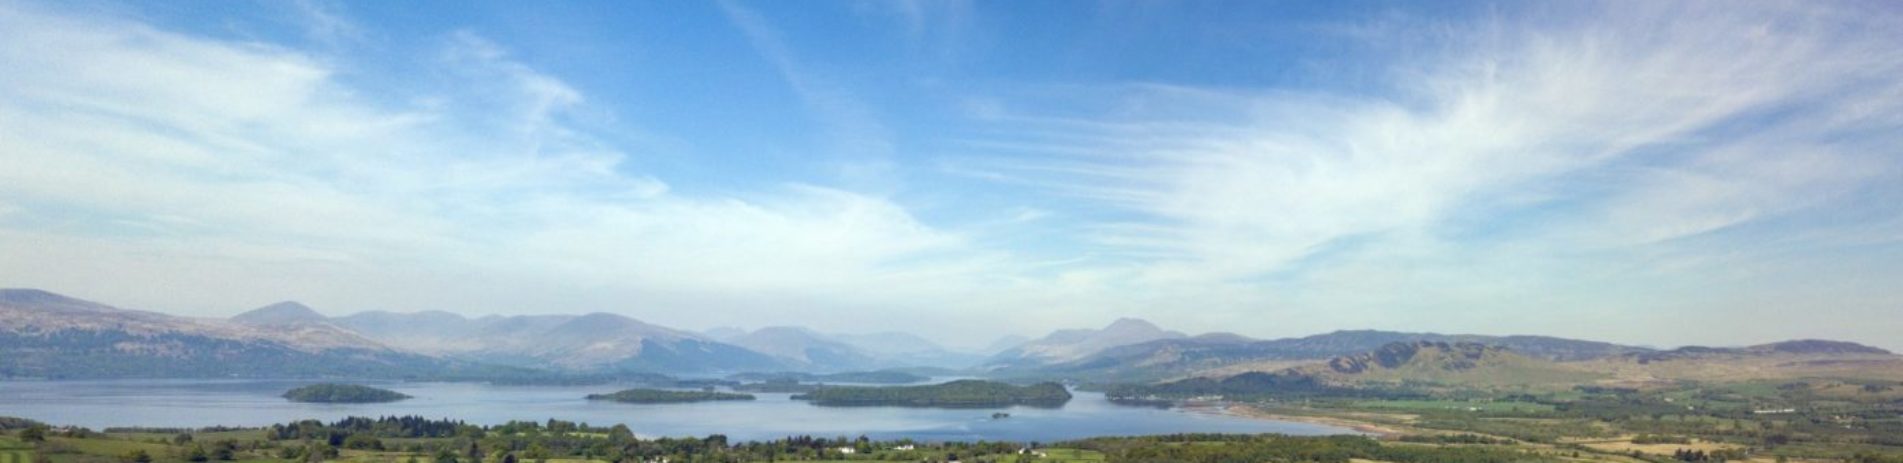 panorama-of-loch-lomond-and-its-islands-sunny-day